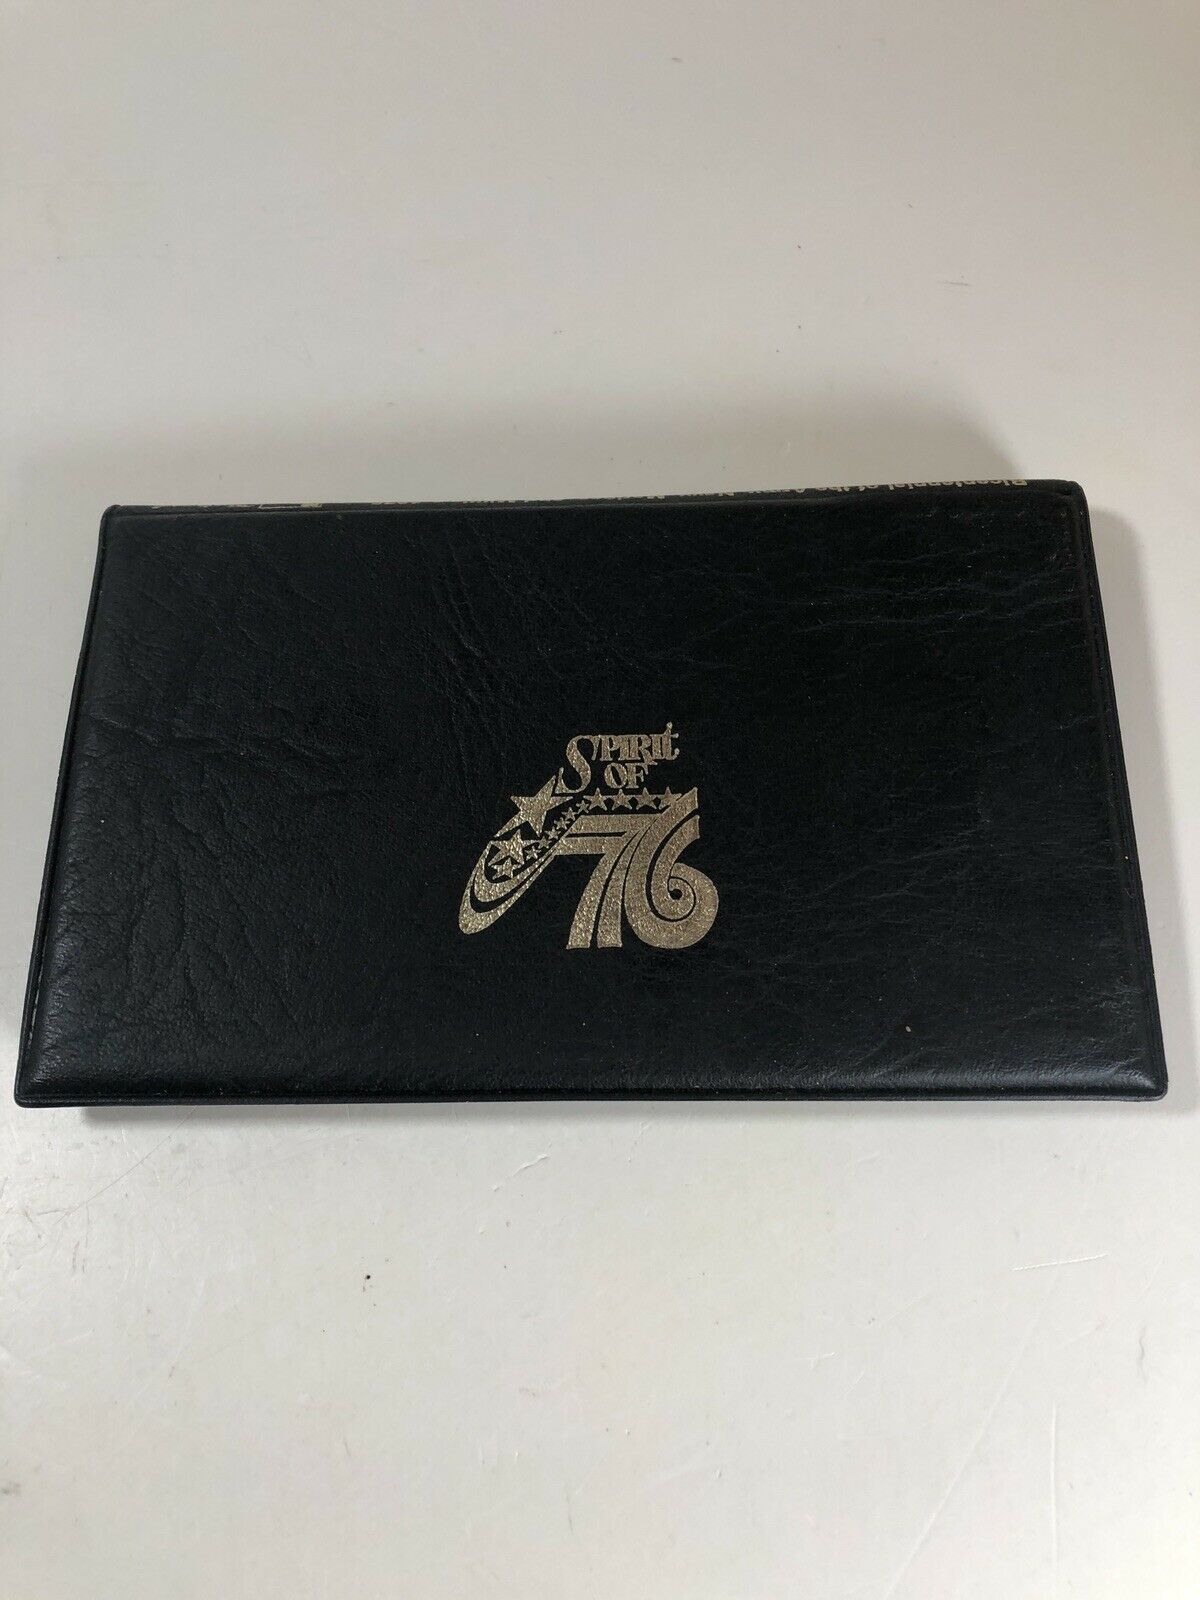 Fleetwood Bicentennial of Army Navy Marines & Militia Spirit of 76 Case Cover